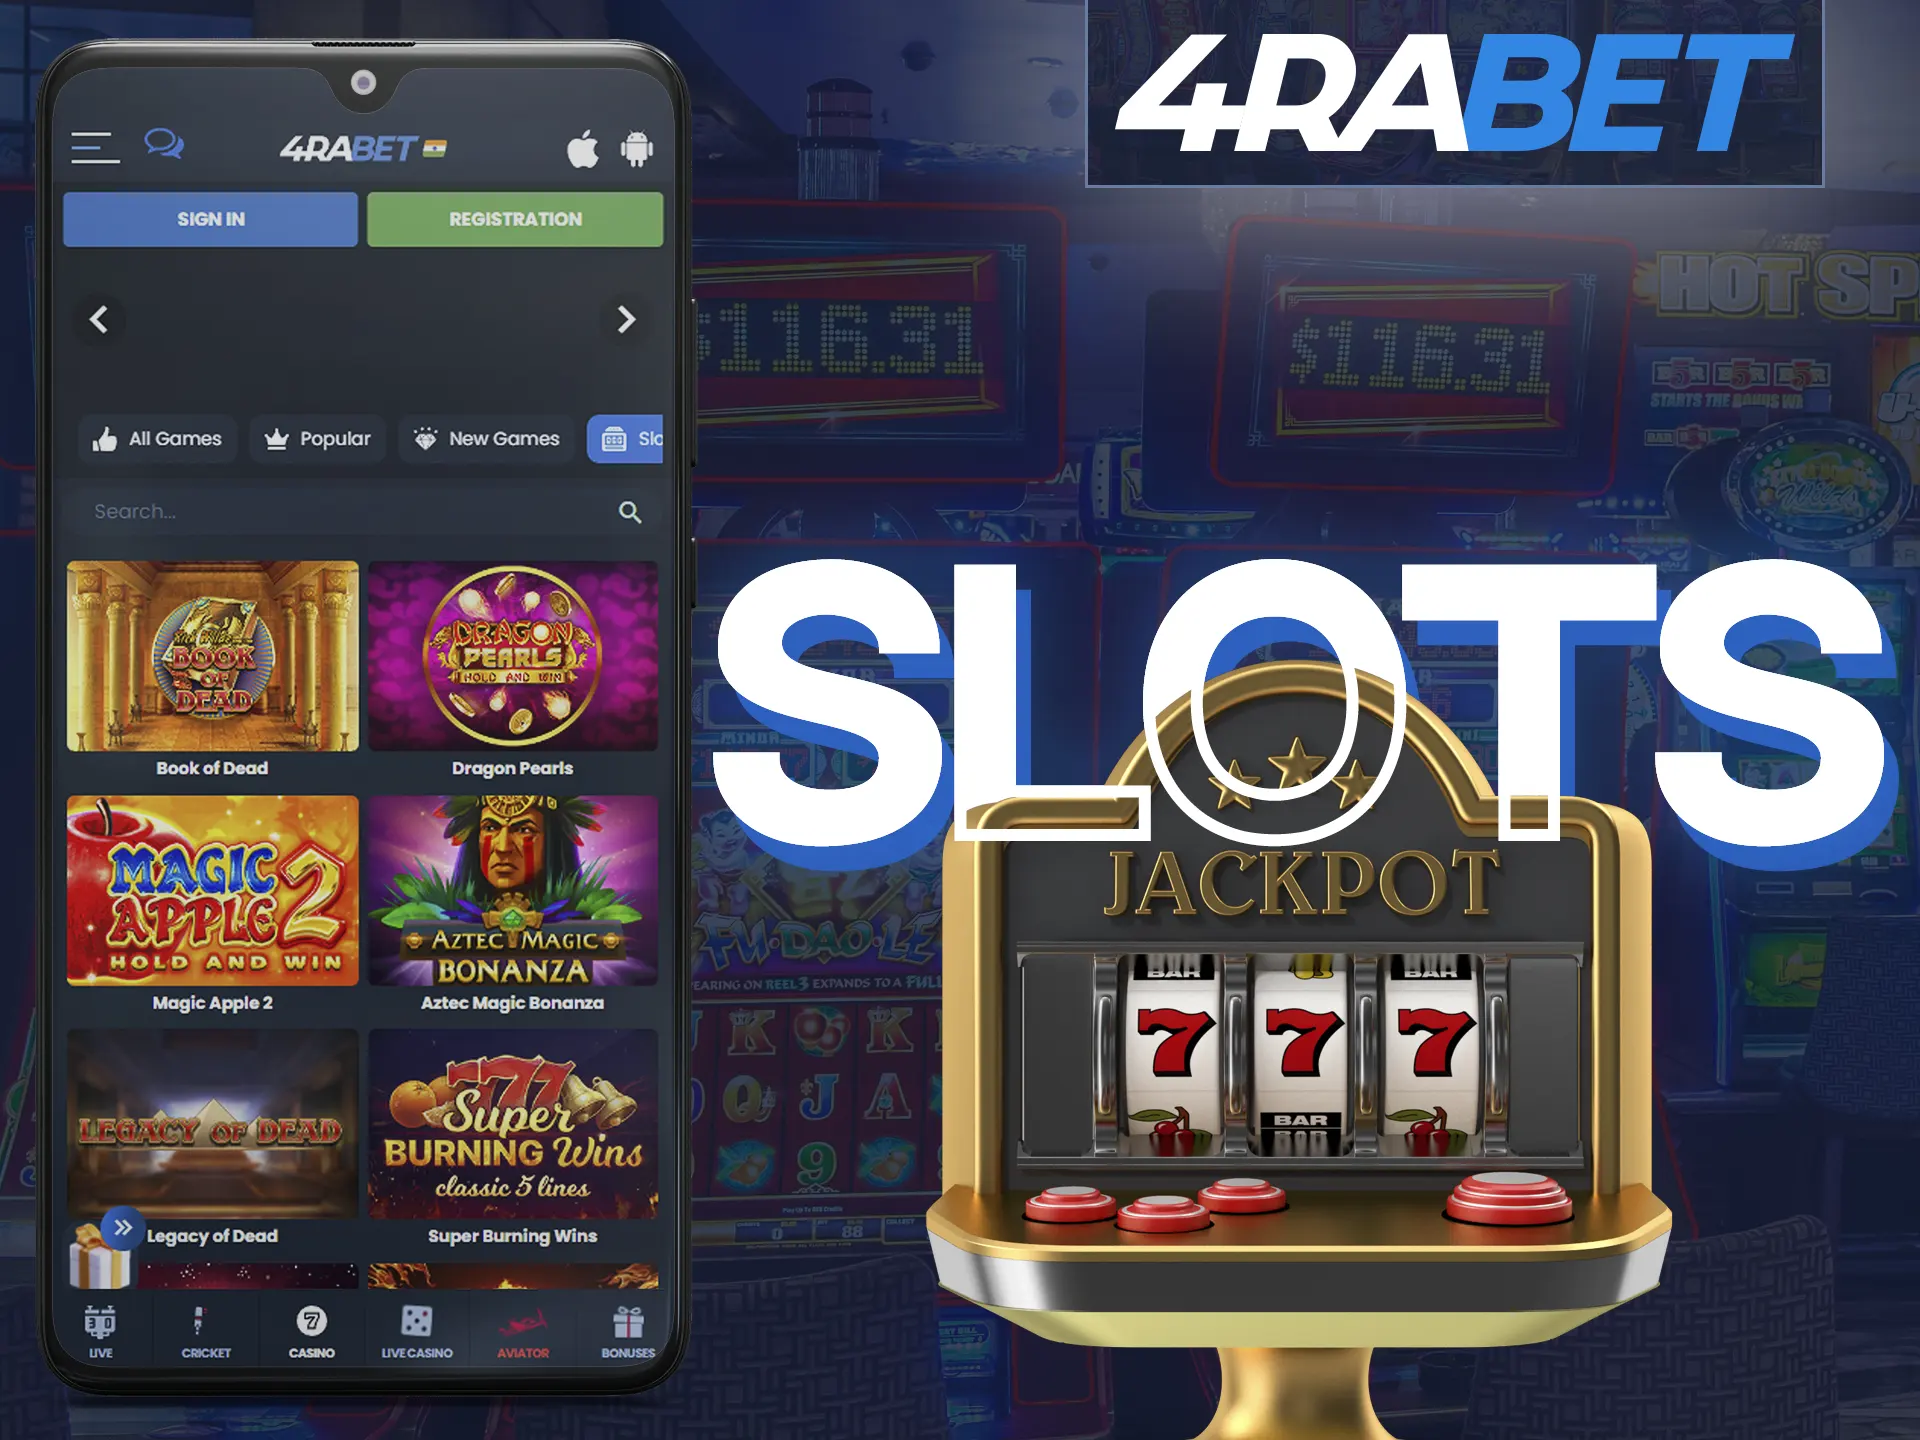 Play slots on the 4Rabet mobile app.